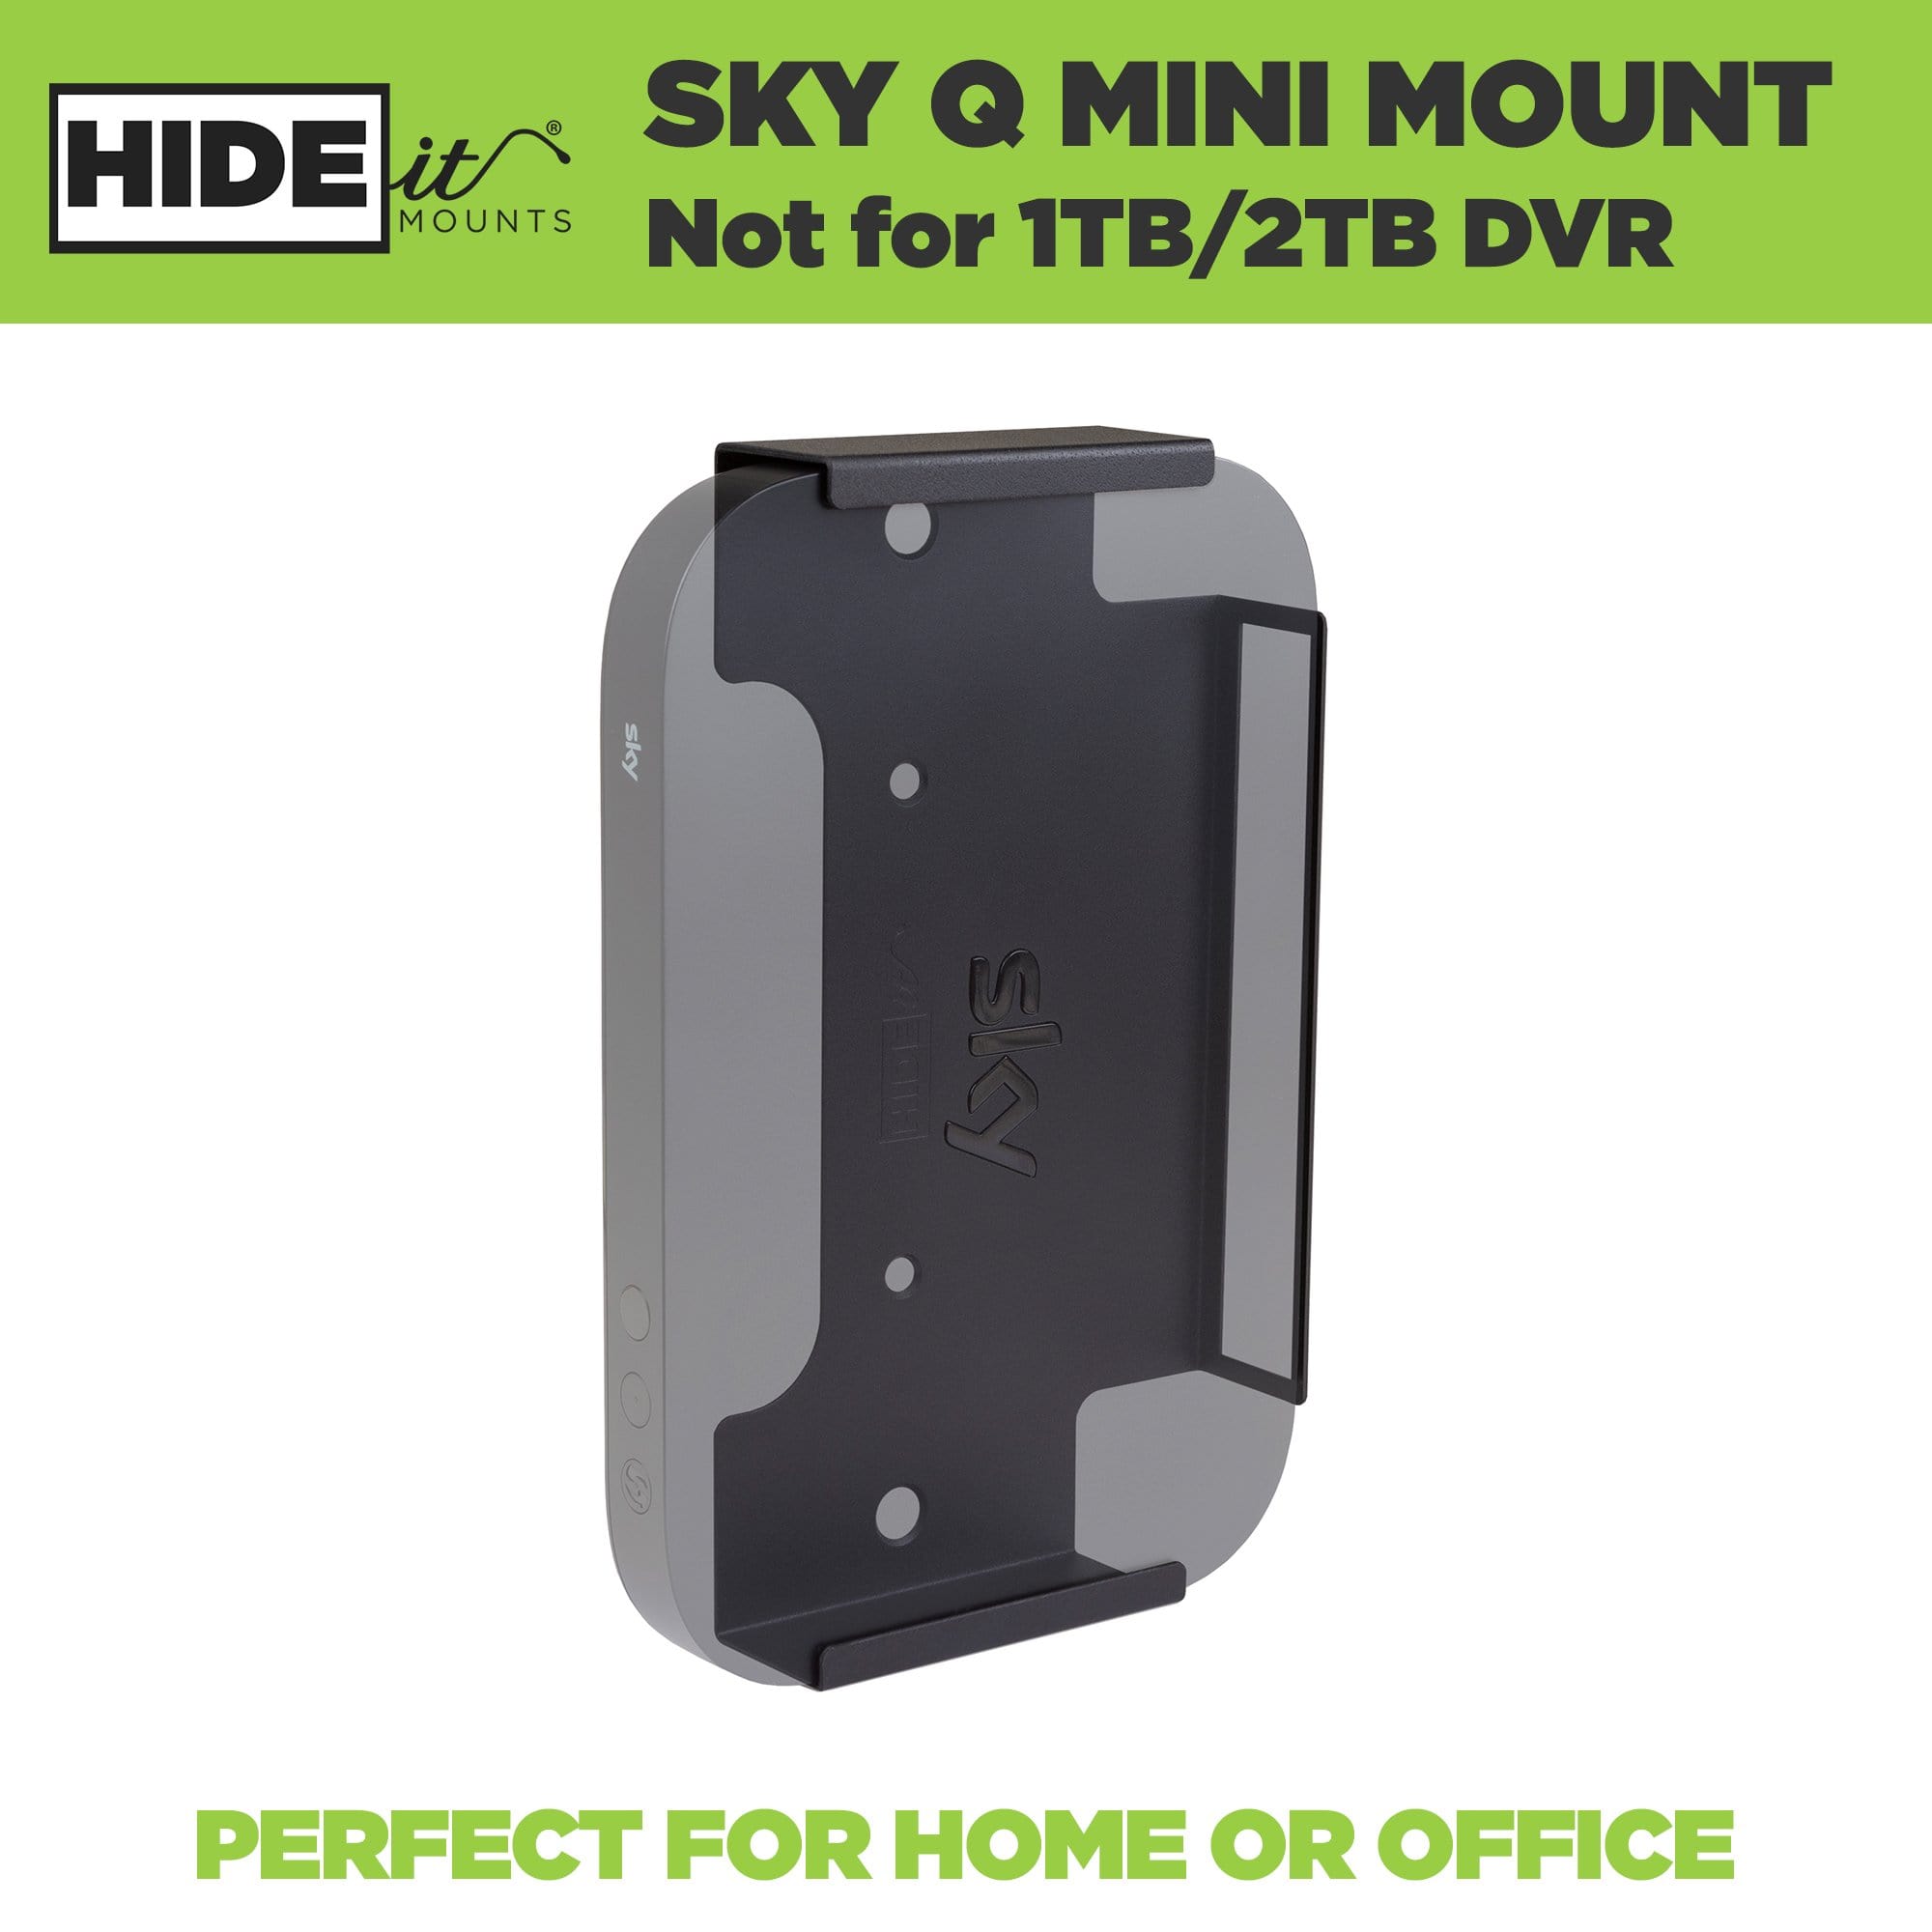 Grayed out device shown in Sky Q Mini Wall Mount made by HIDEit Mounts to hide your cable box.